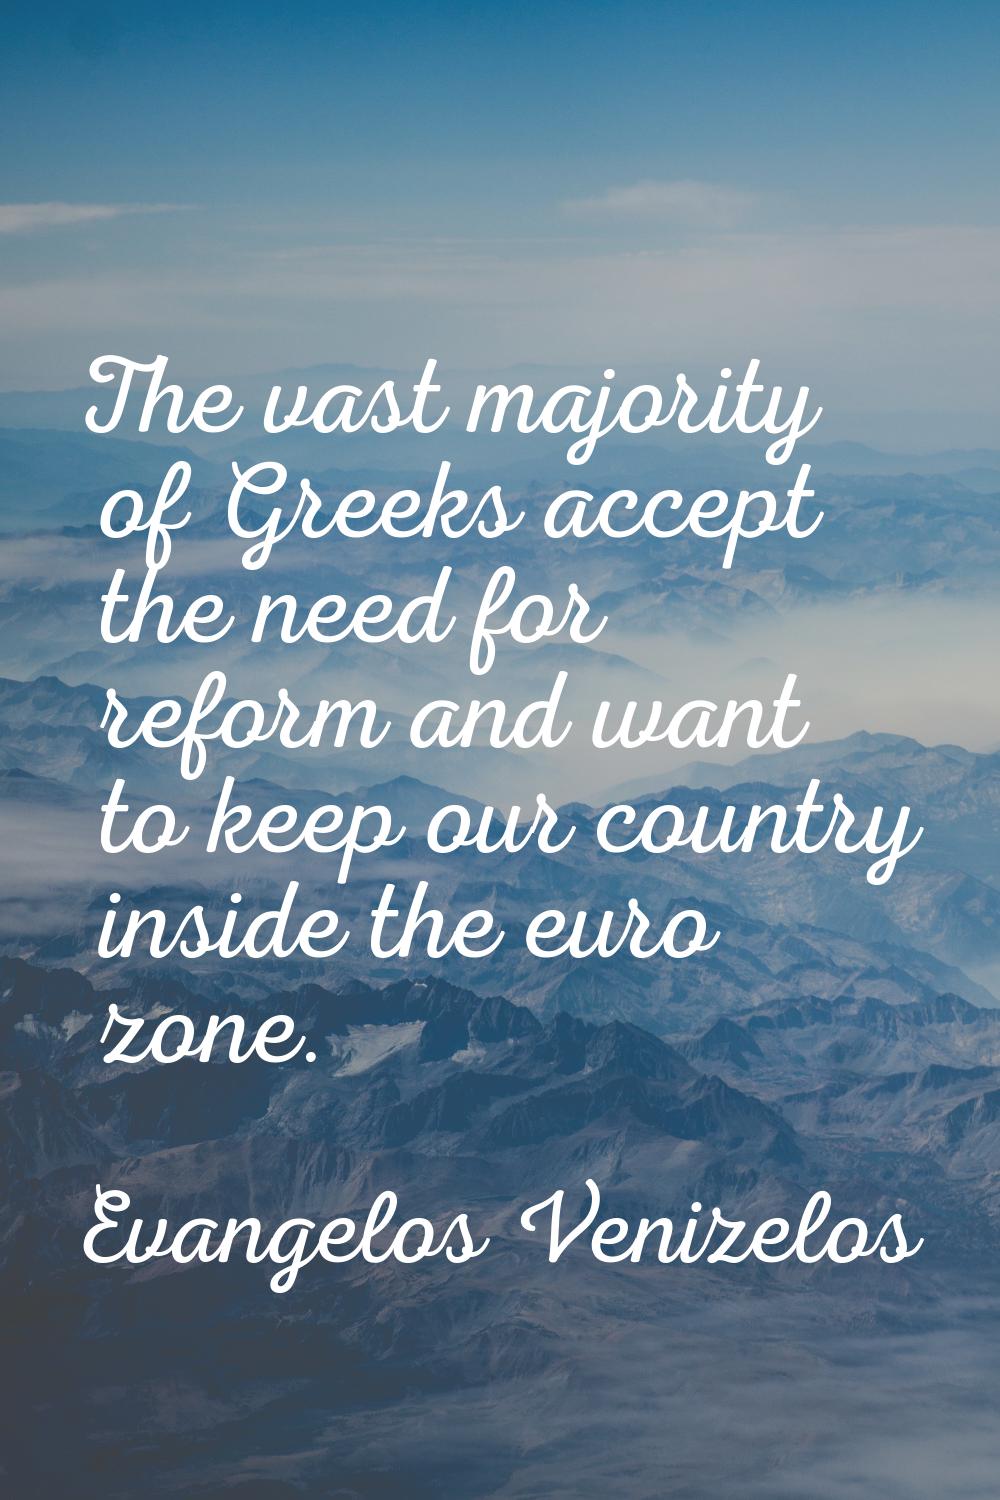 The vast majority of Greeks accept the need for reform and want to keep our country inside the euro